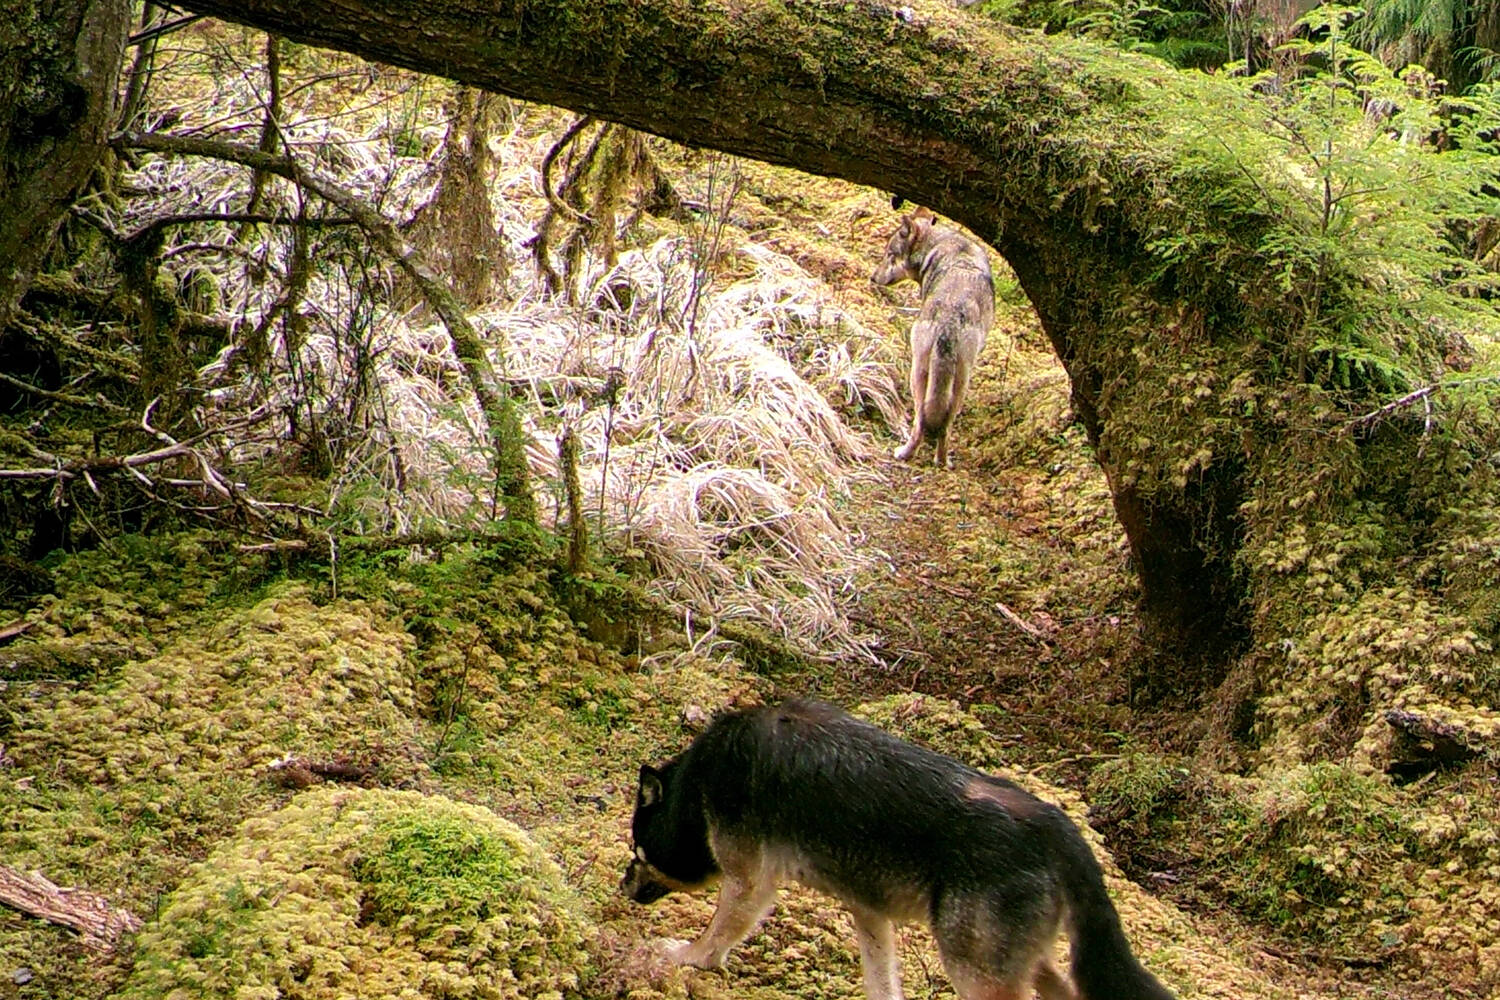 Two Alexander Archipelago wolves are seen March 21, 2020, in a trail camera image provided by the U.S. Fish and Wildlife Service. (U.S. Fish and Wildlife Service photo)